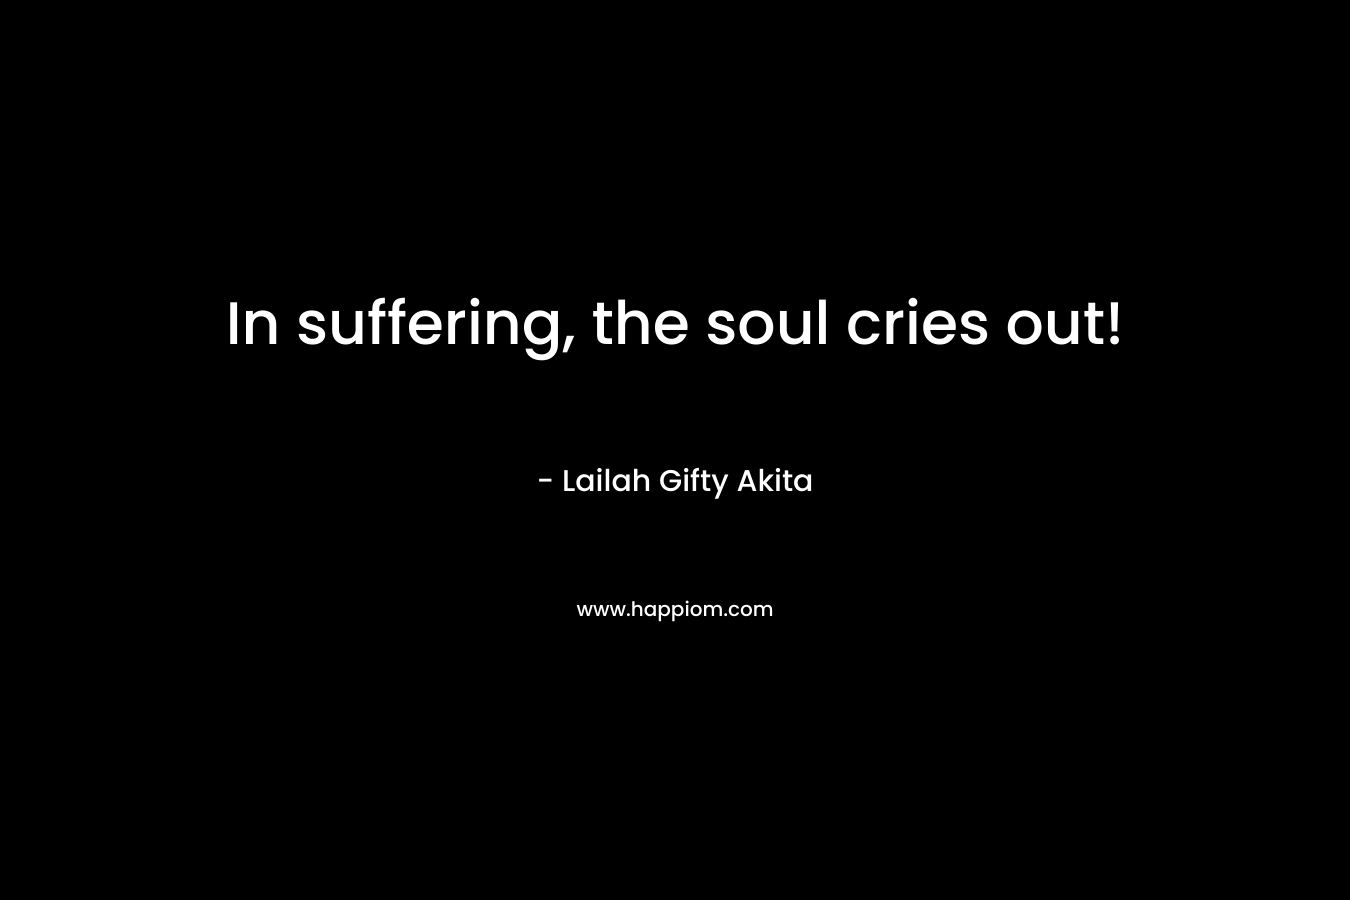 In suffering, the soul cries out!